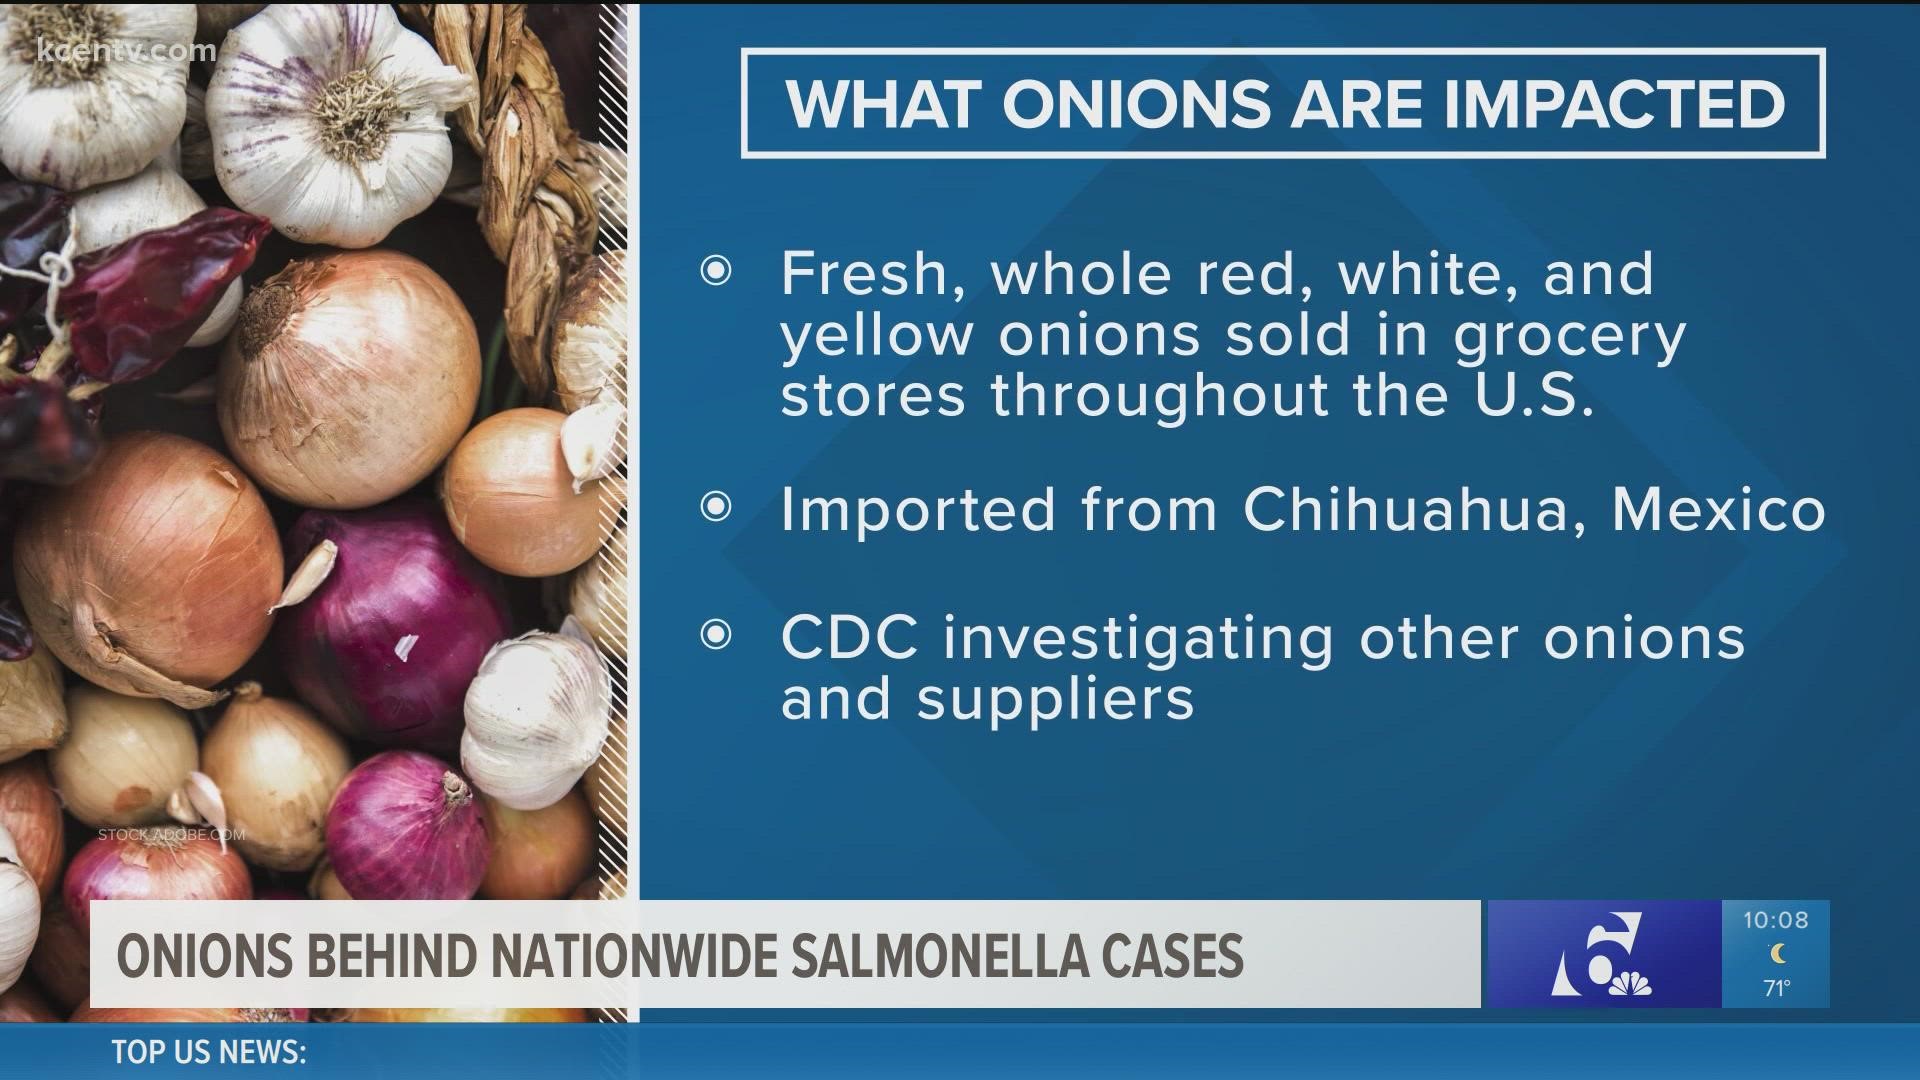 Federal health regulators have issued an alert urging people to throw these onions away.